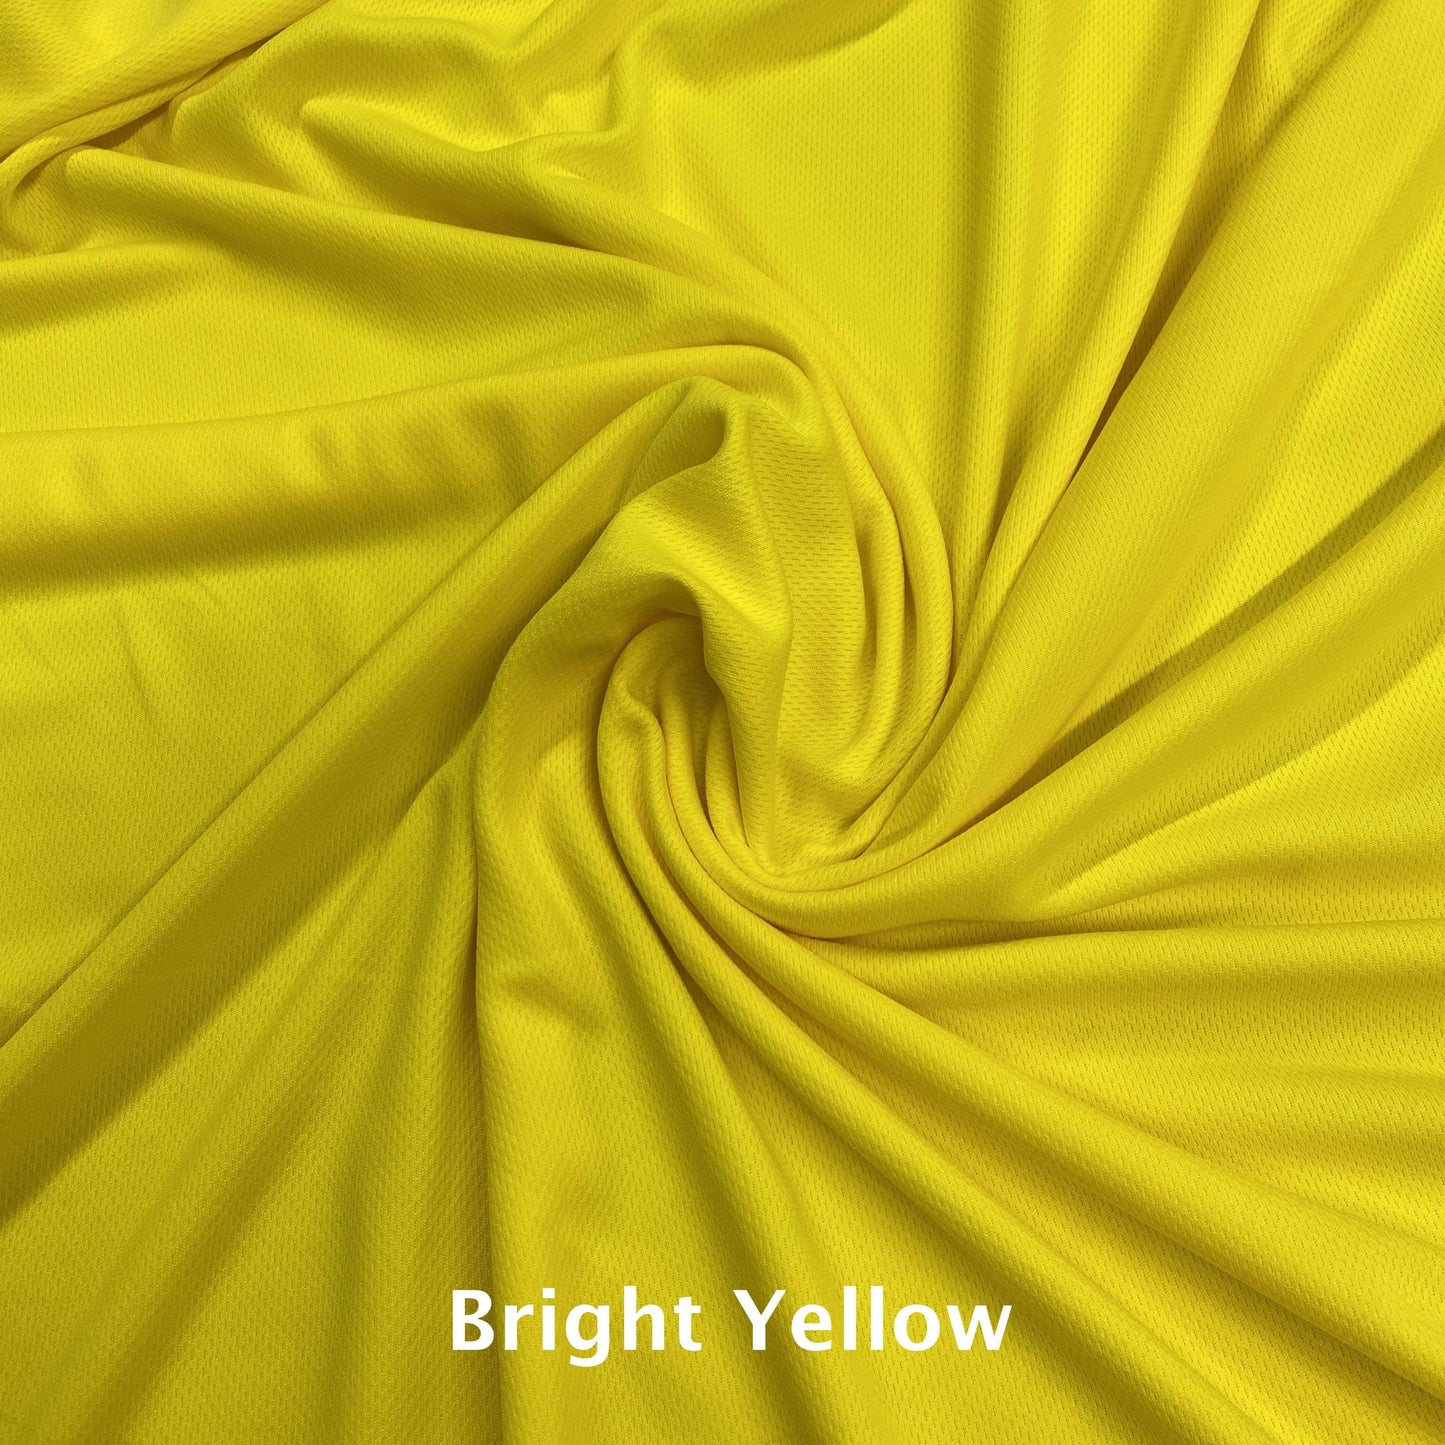 Polyester Athletic Wicking Jersey Fabric, $5.95/yd, 15 Yards - Your Choice of One Color - Nature's Fabrics